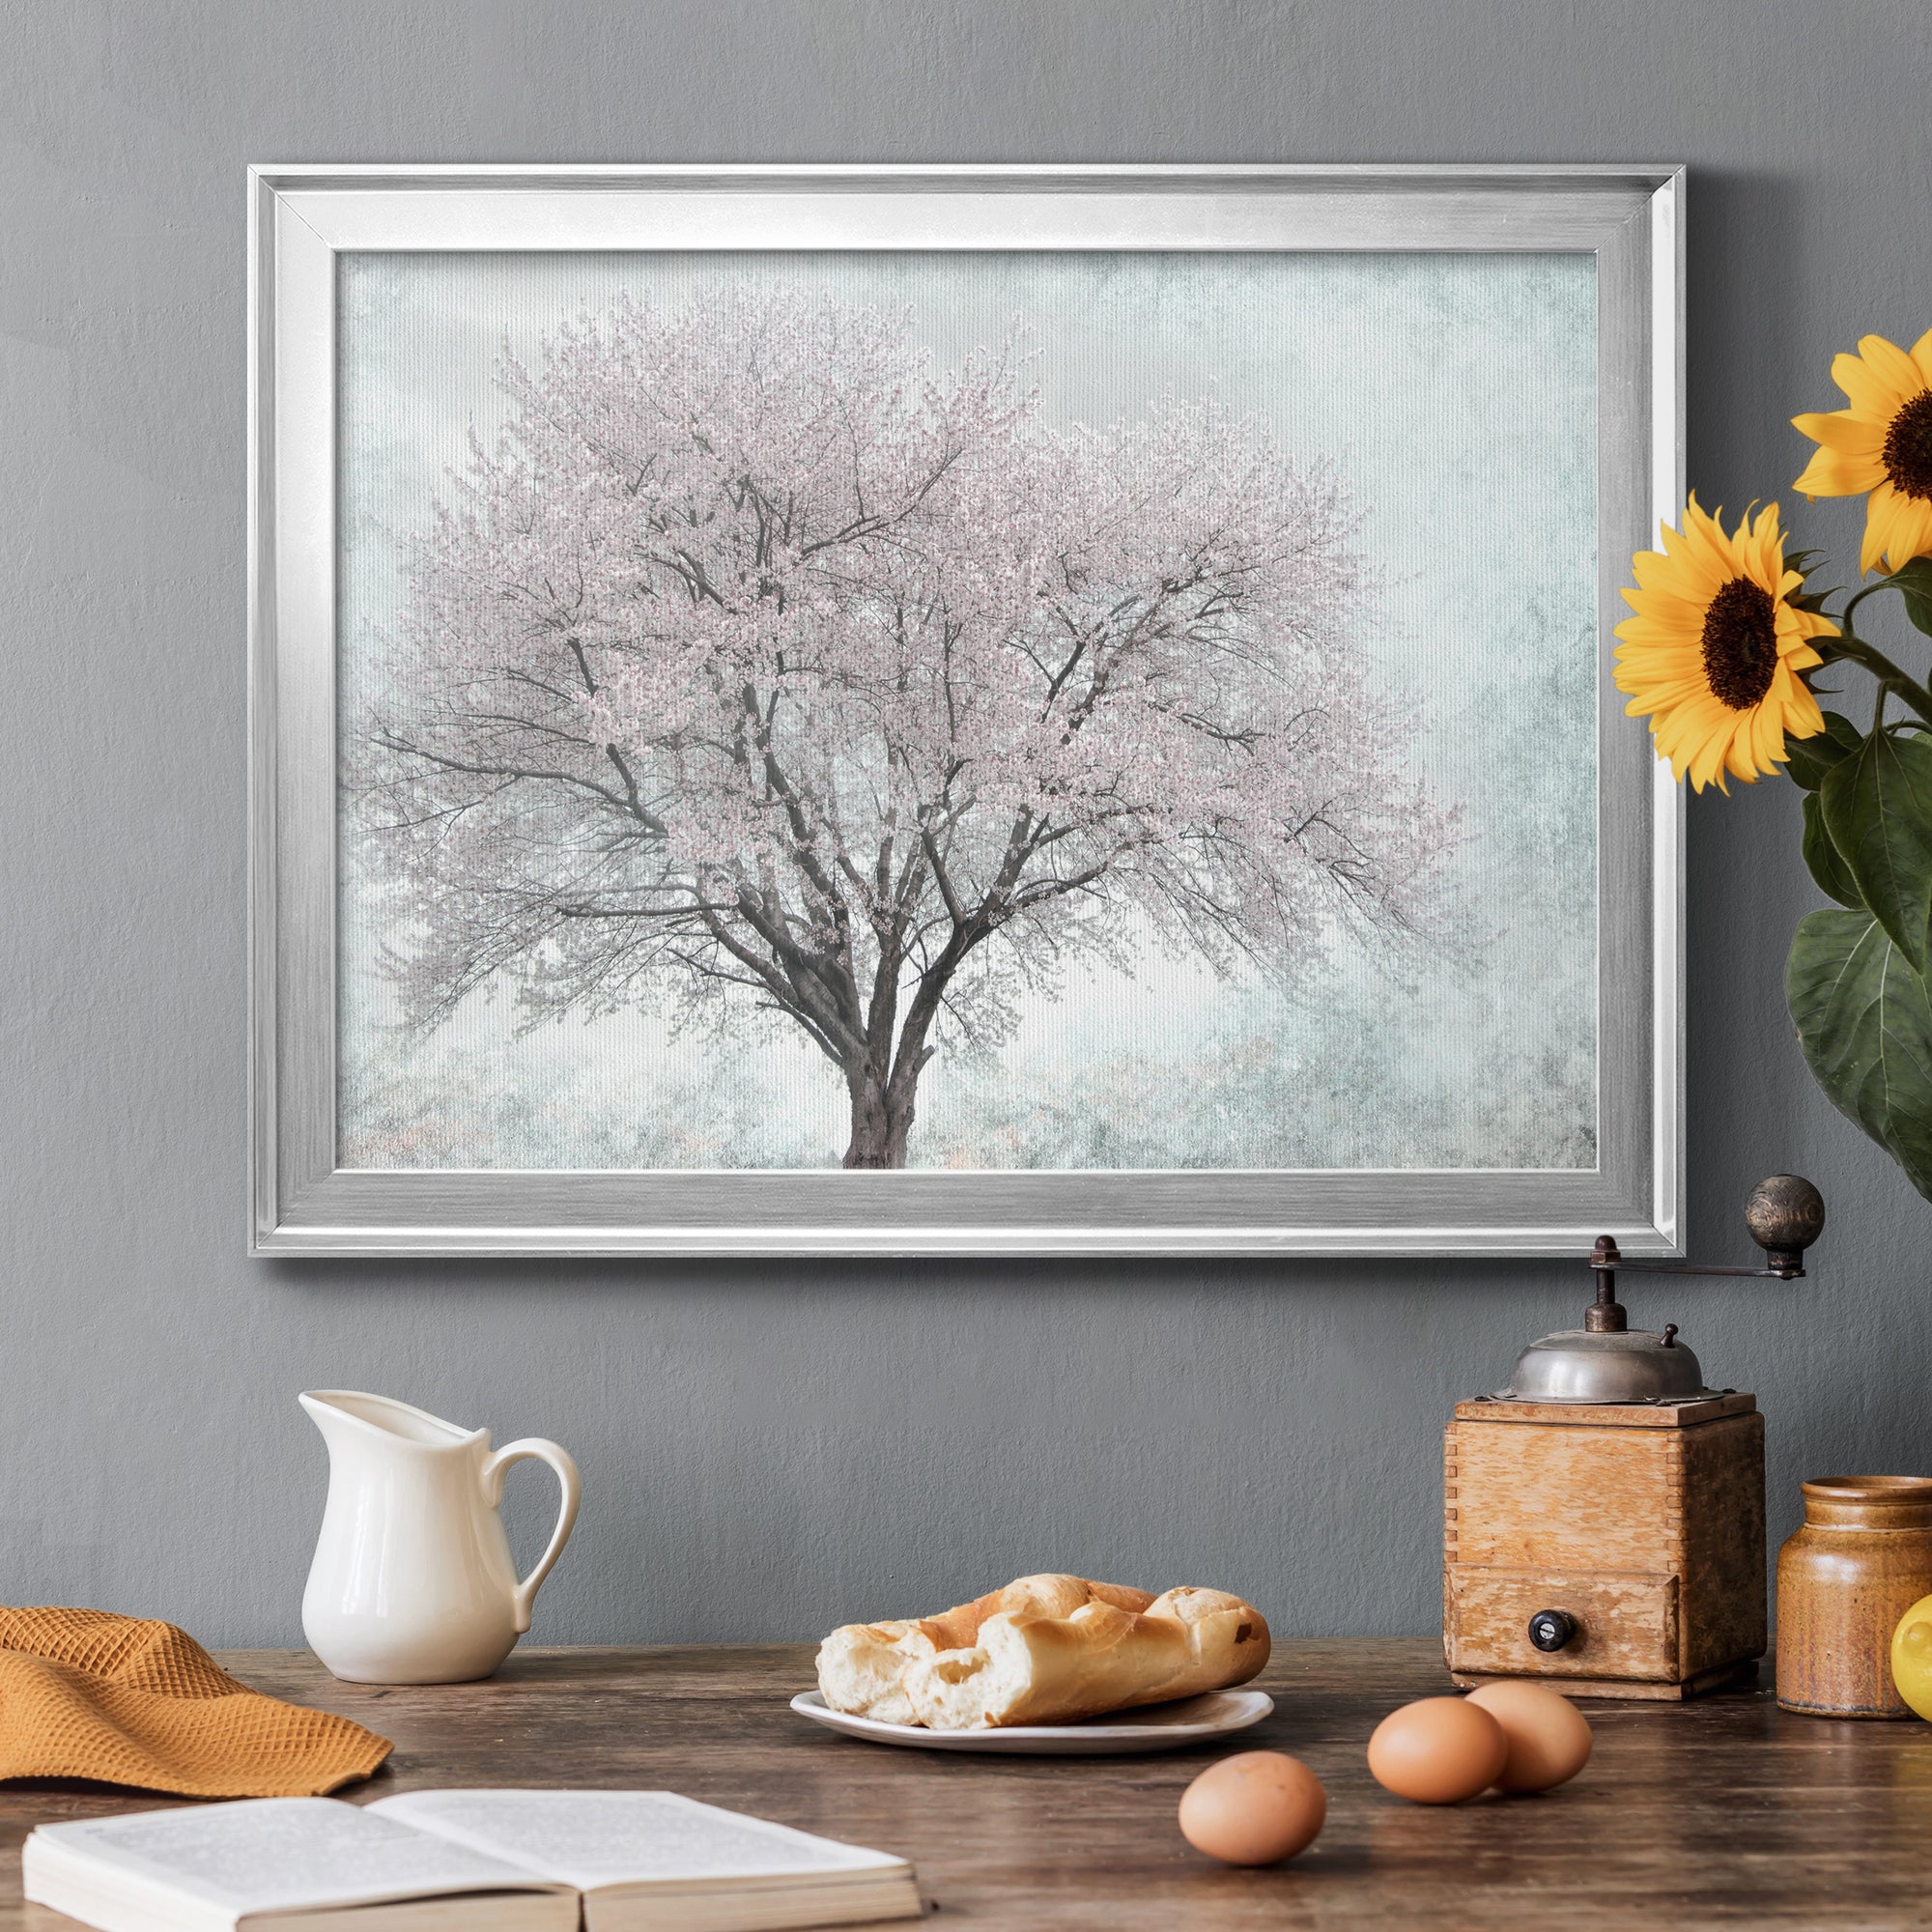 A Feel of Spring I Premium Classic Framed Canvas - Ready to Hang